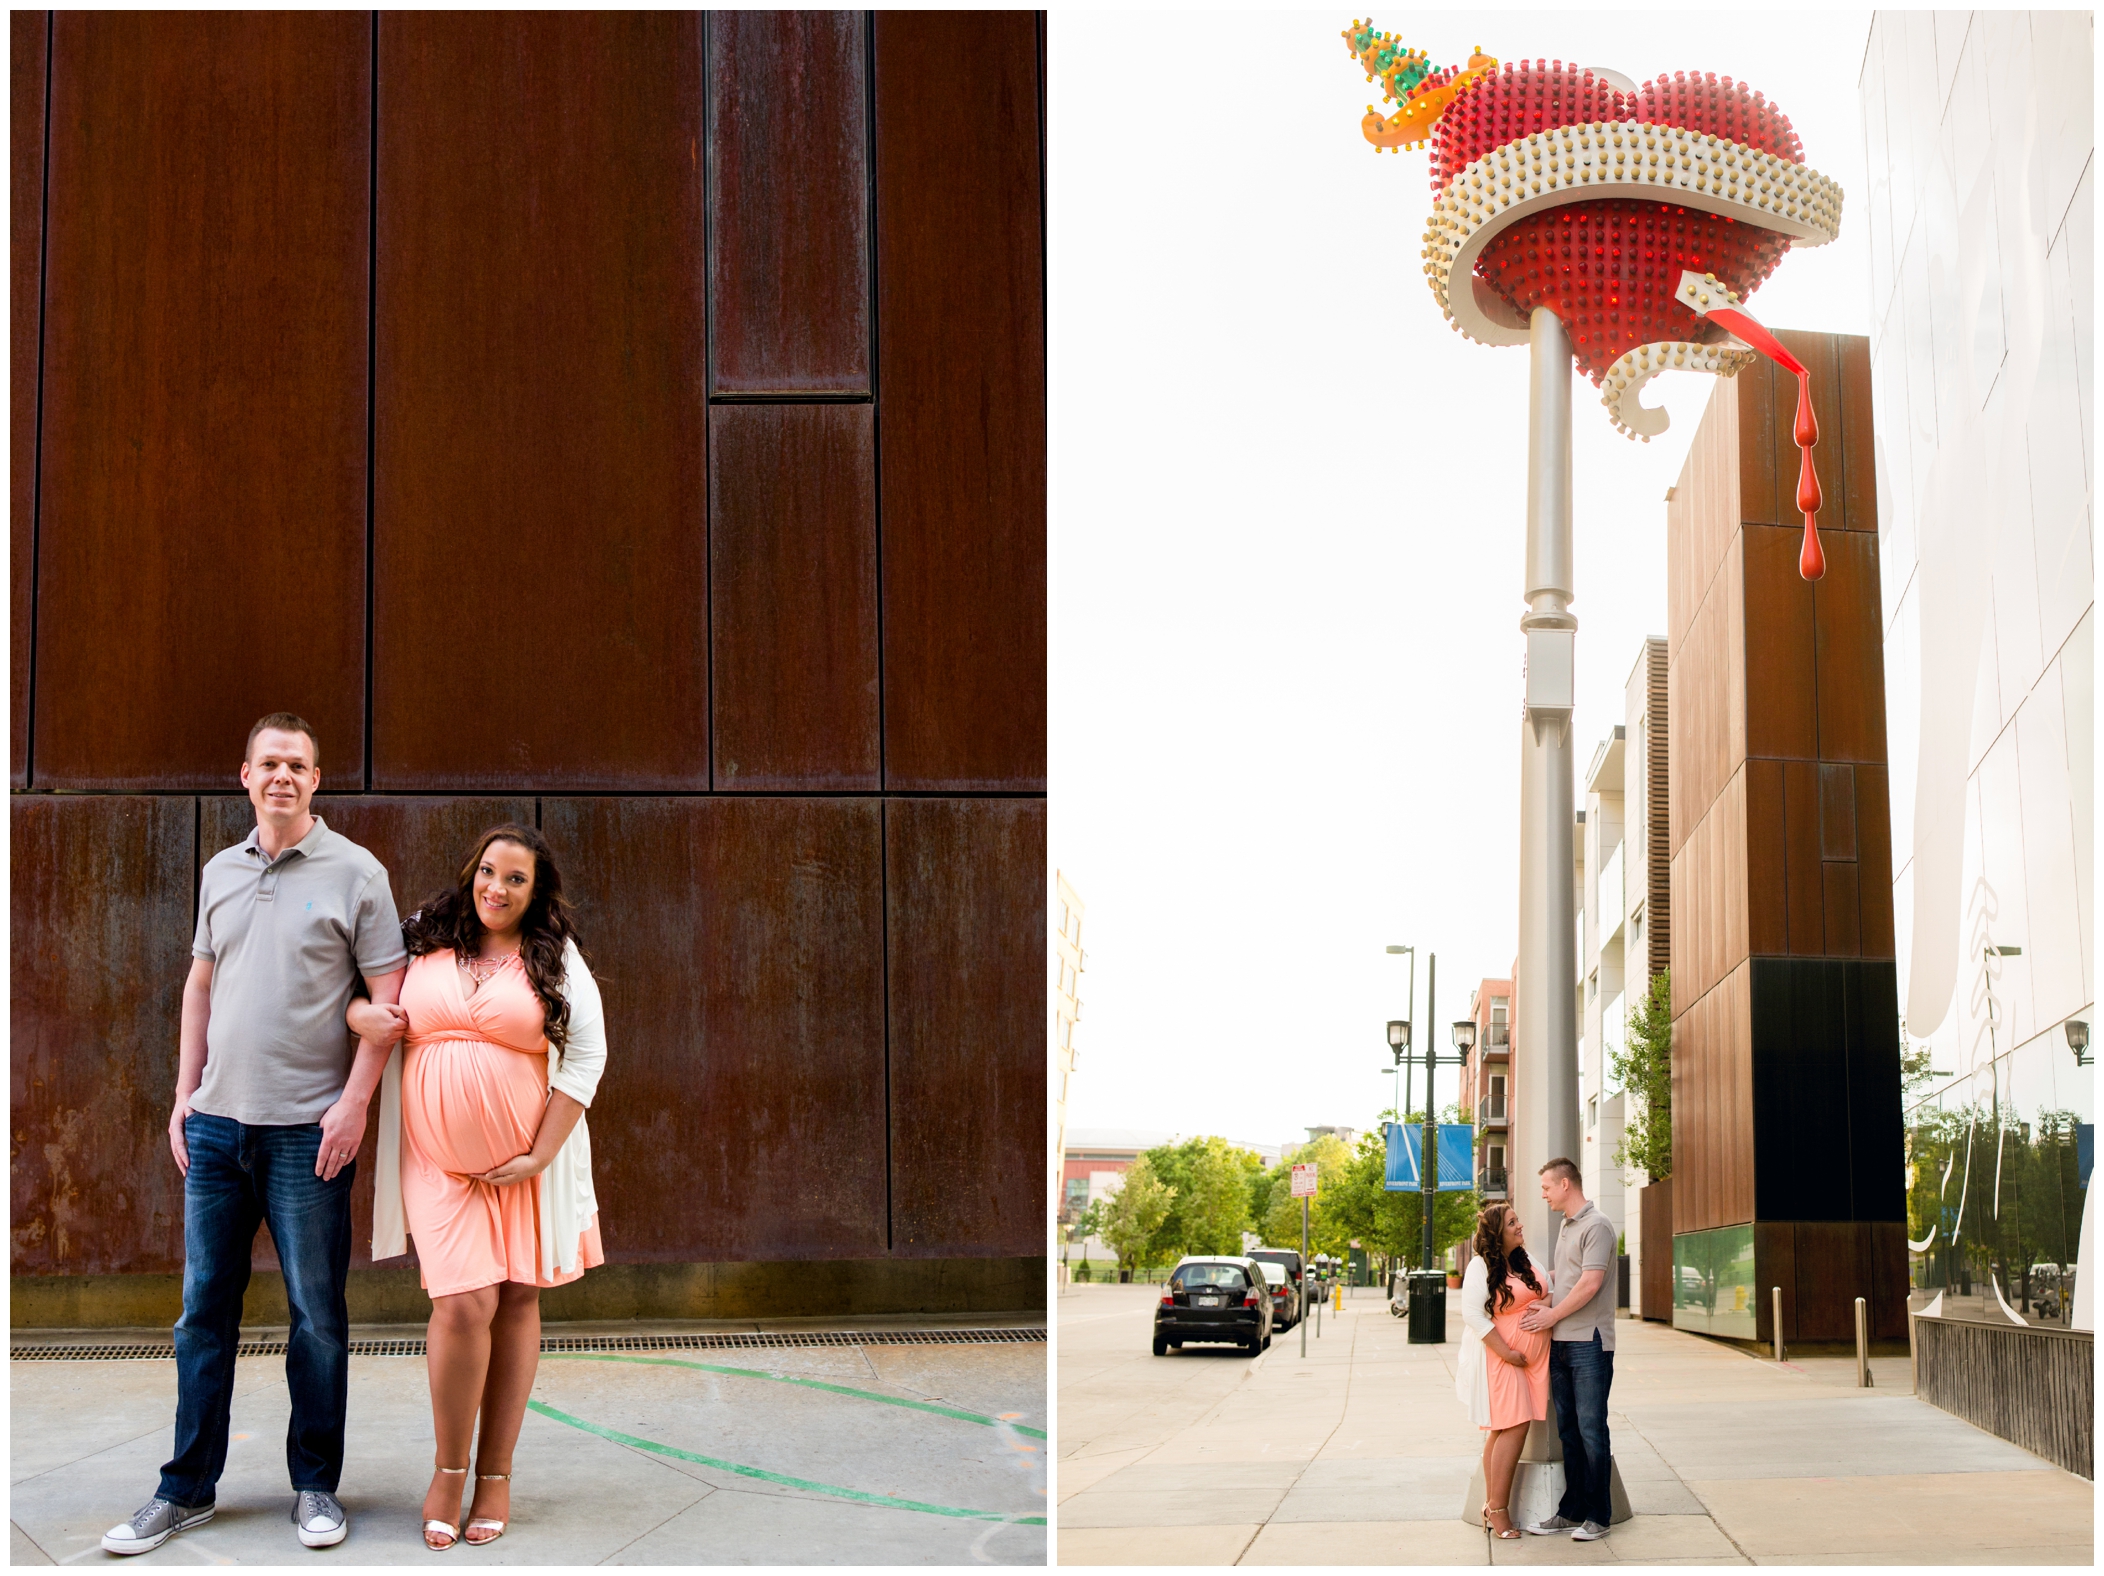 Denver Colorado maternity pictures by heart sculpture at Denver Museum of Contemporary Art